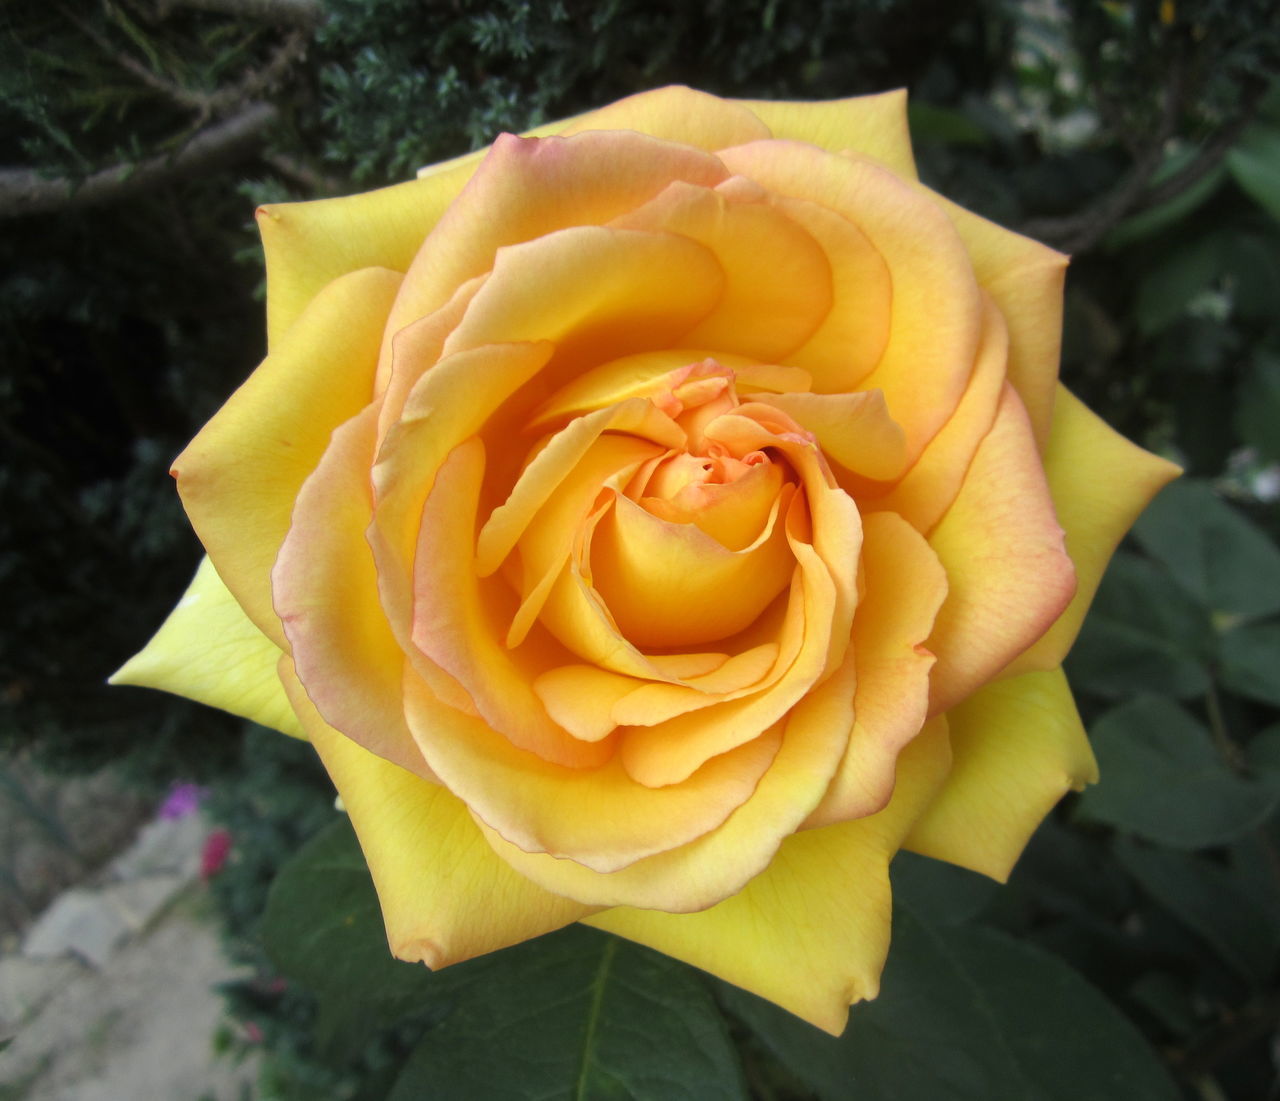 yellow, flower, flowering plant, beauty in nature, plant, rose, petal, flower head, inflorescence, close-up, fragility, freshness, nature, garden roses, no people, leaf, growth, plant part, outdoors, focus on foreground, rose - flower, day, springtime